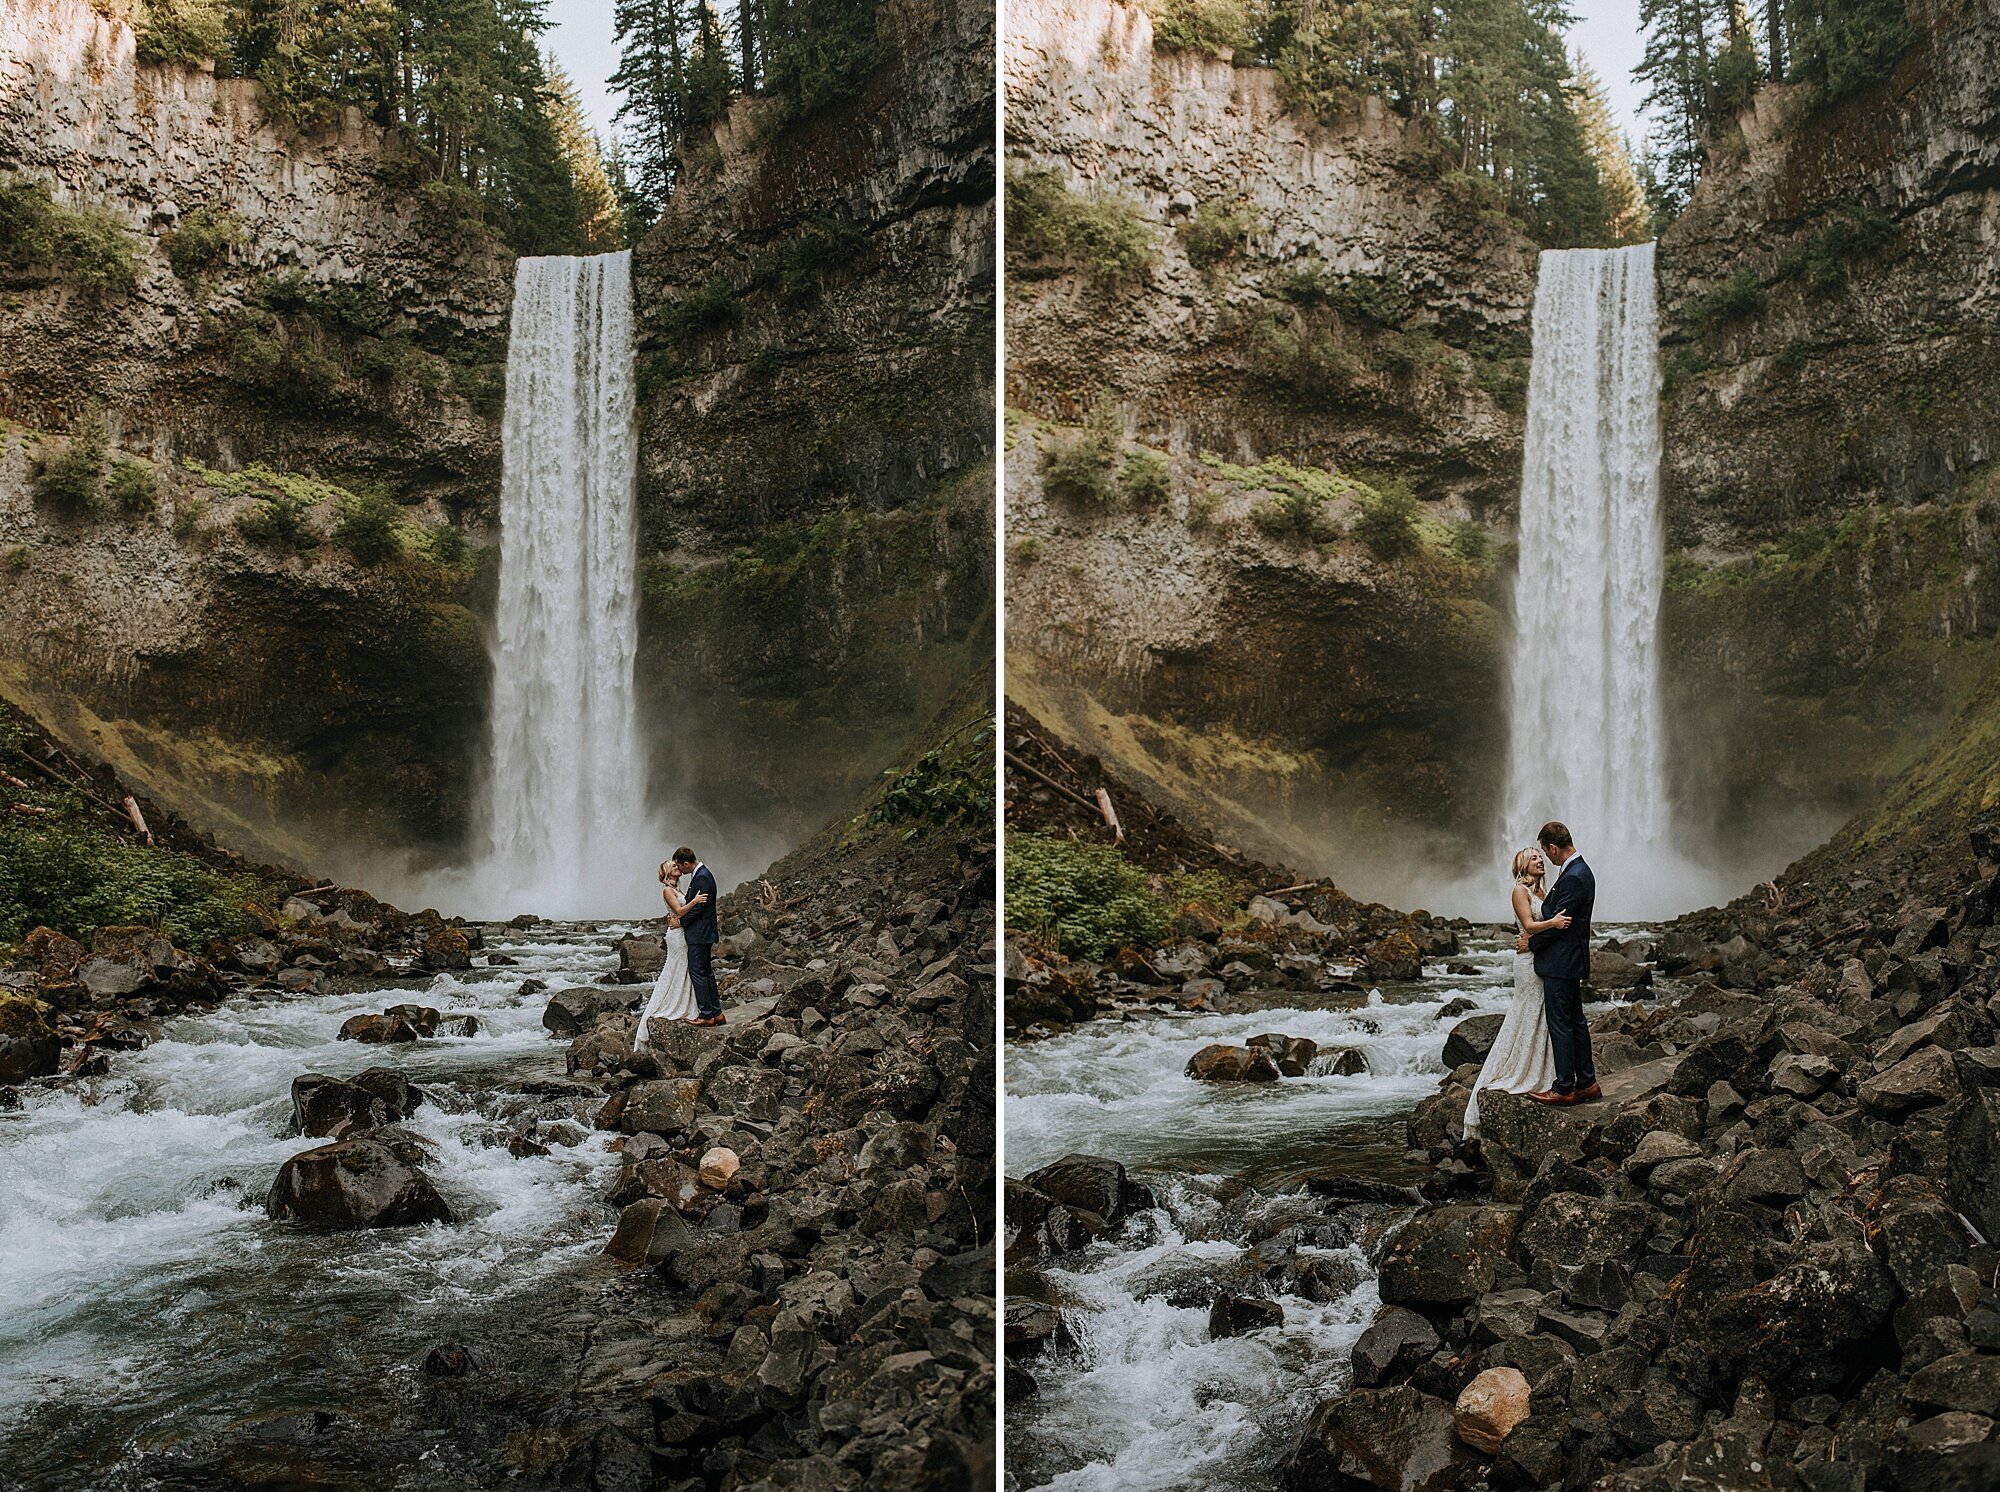 Bride and Groom embracing in front of waterfall